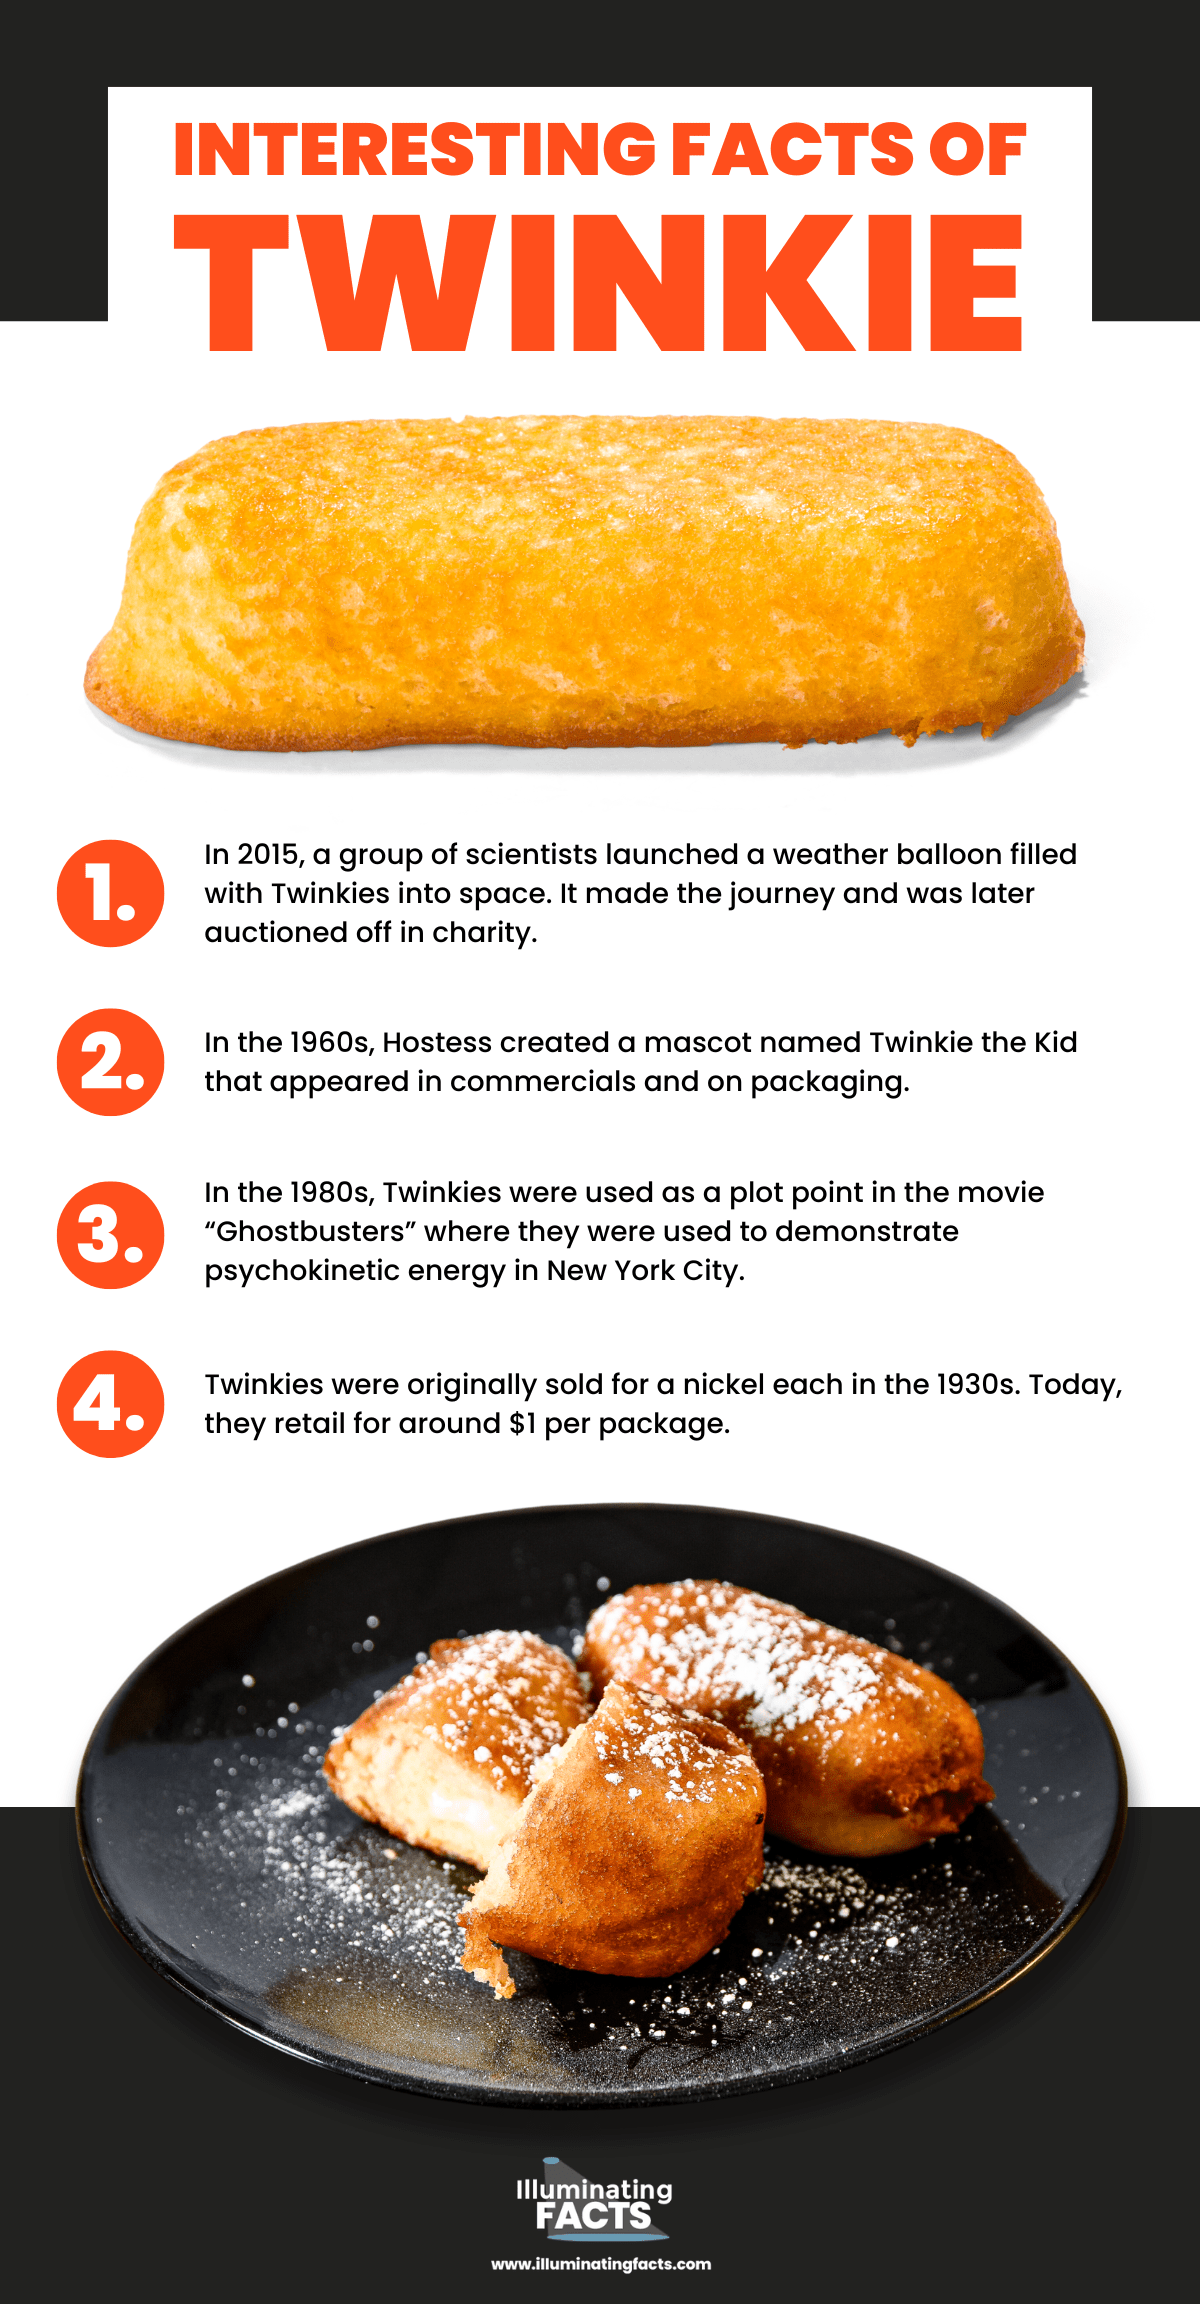 Interesting facts of Twinkie